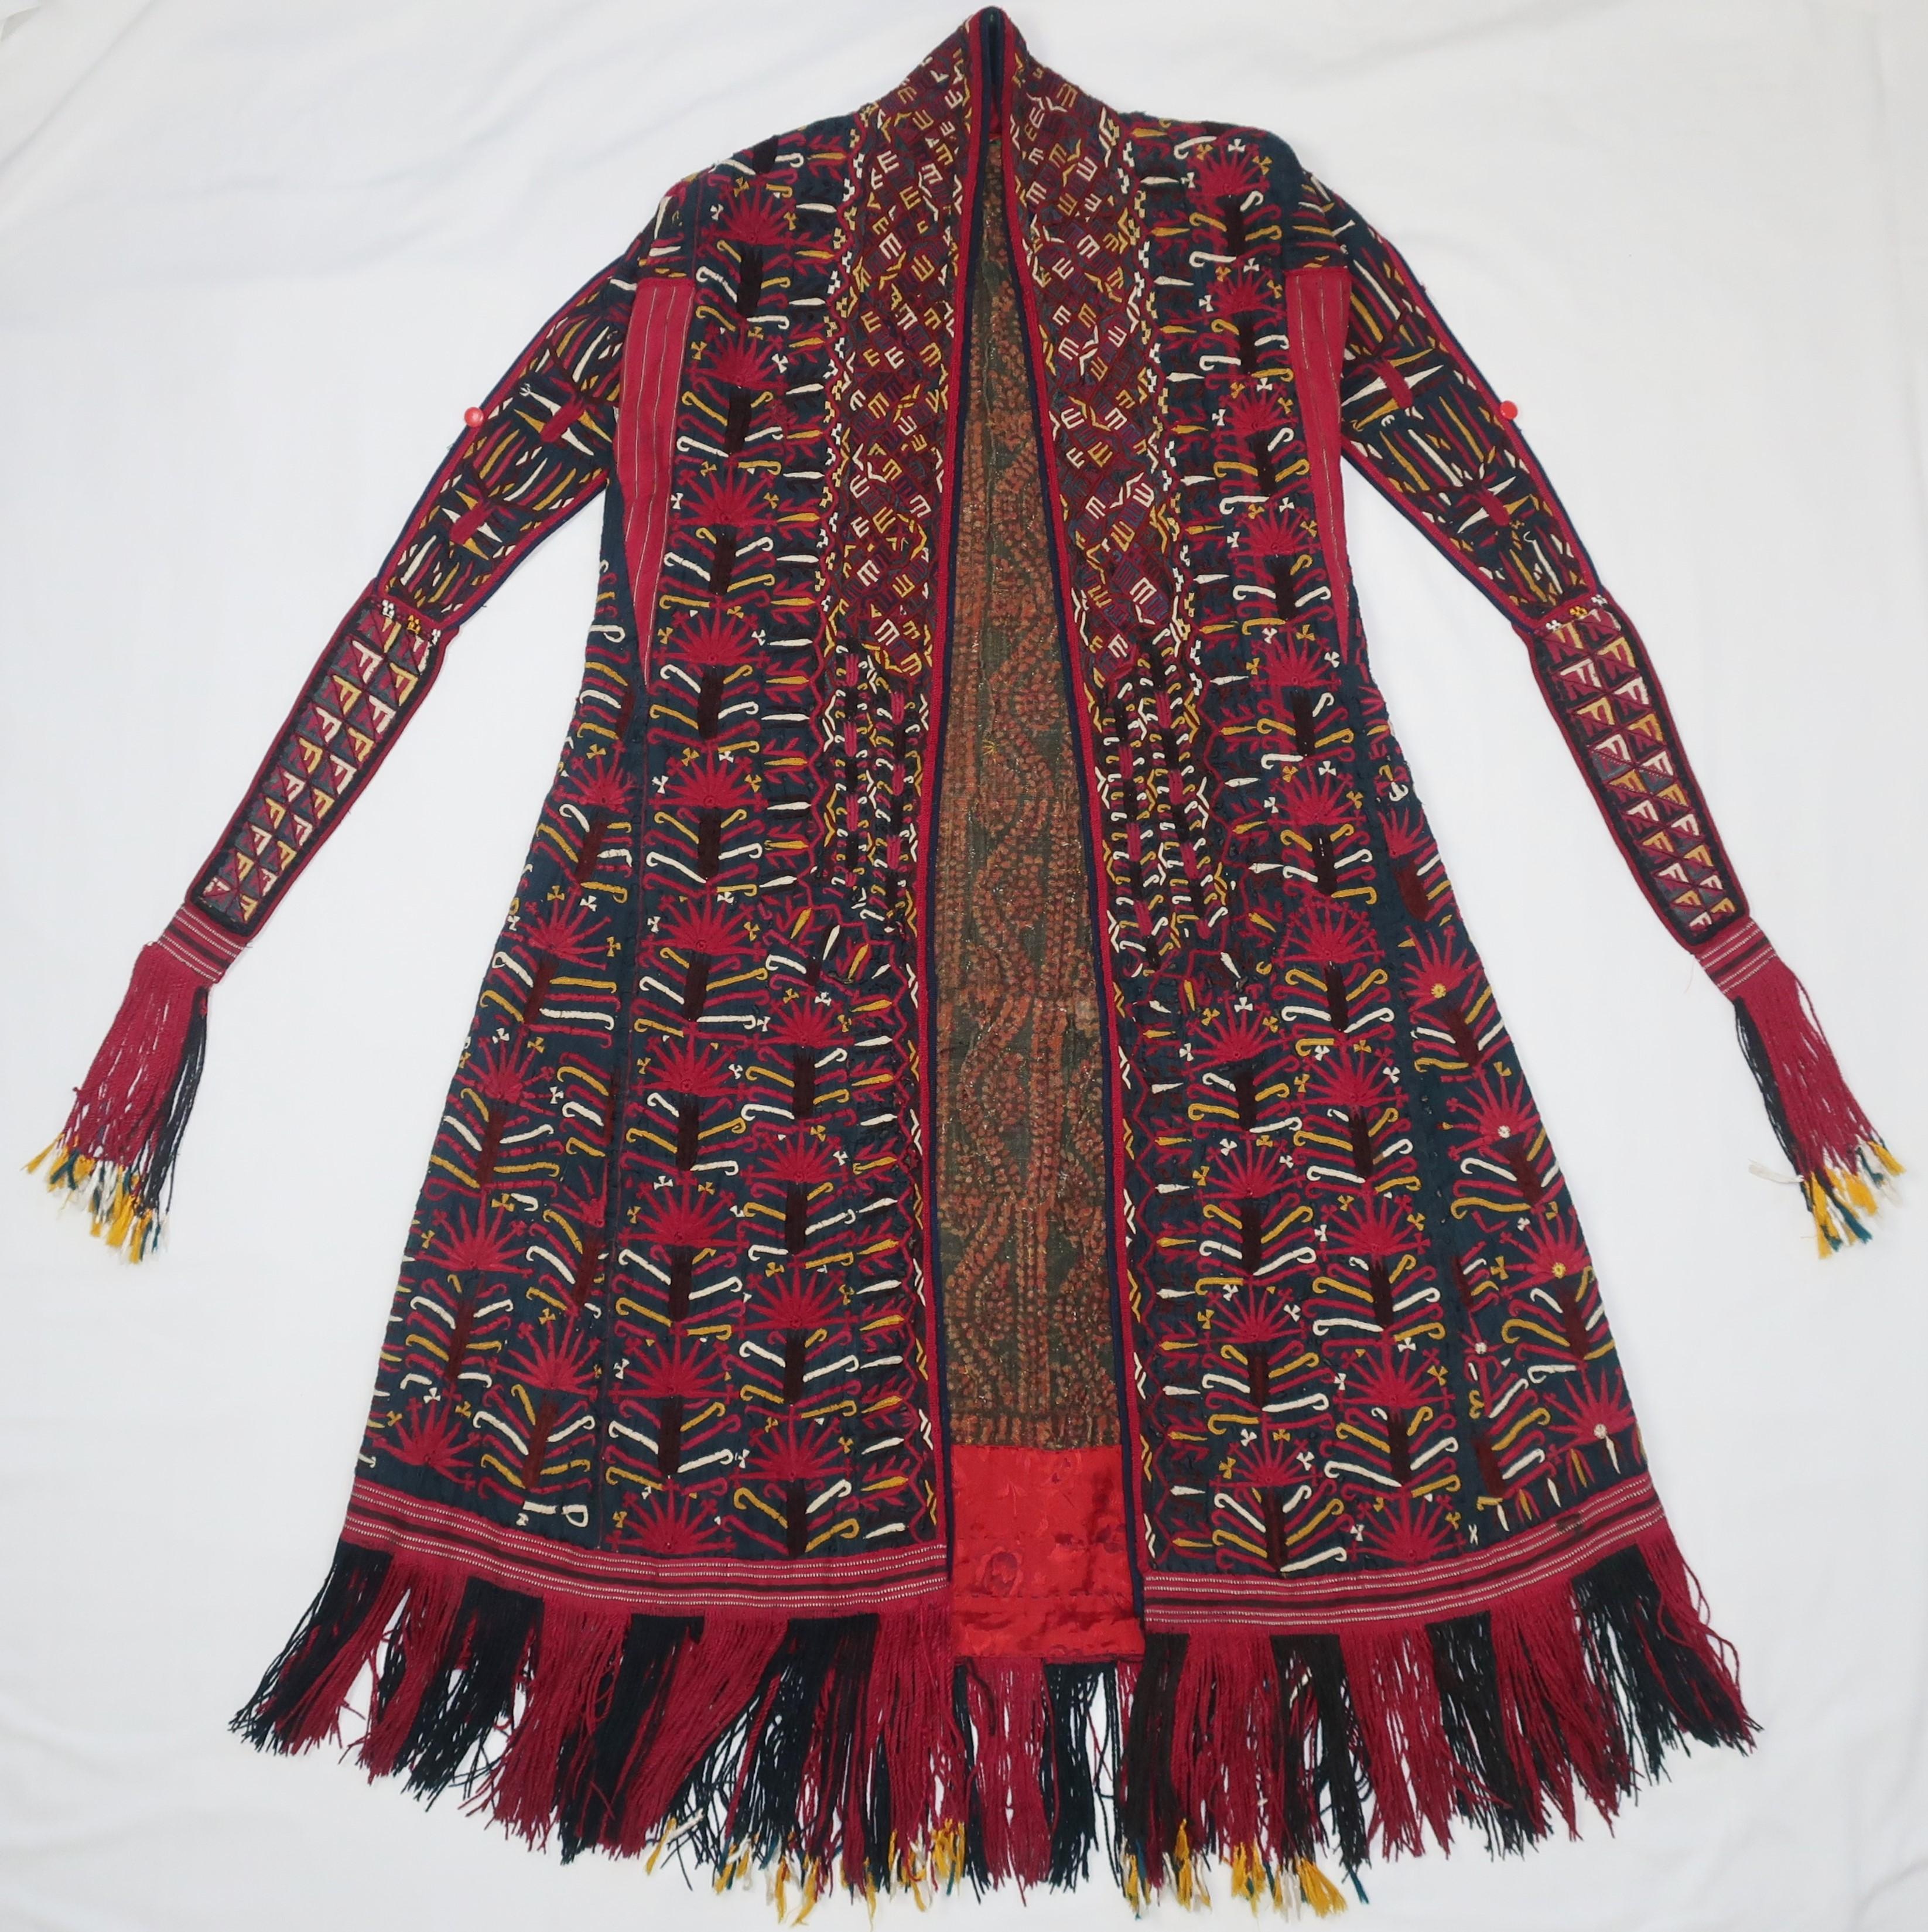 19th Century Central Asian Embroidered Chyrpy Mantle Cloak For Sale 5